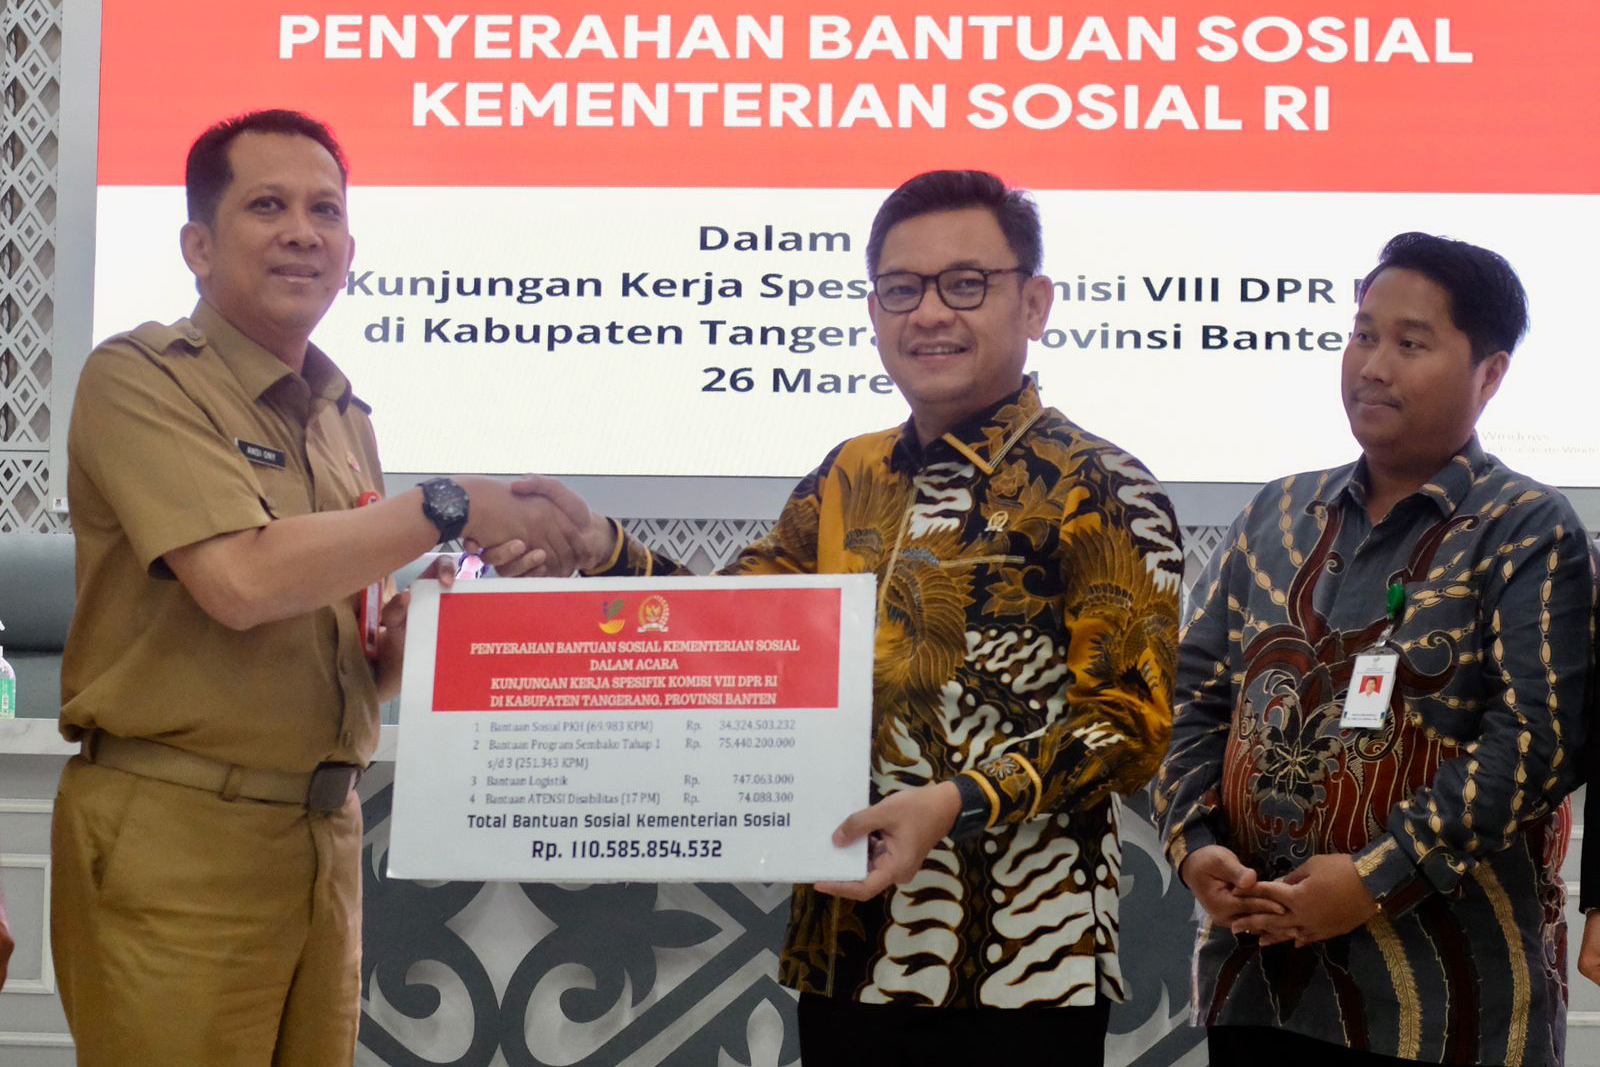 Specific Visit of the MoSA and Commission VIII DPR RI in Tangerang Regency